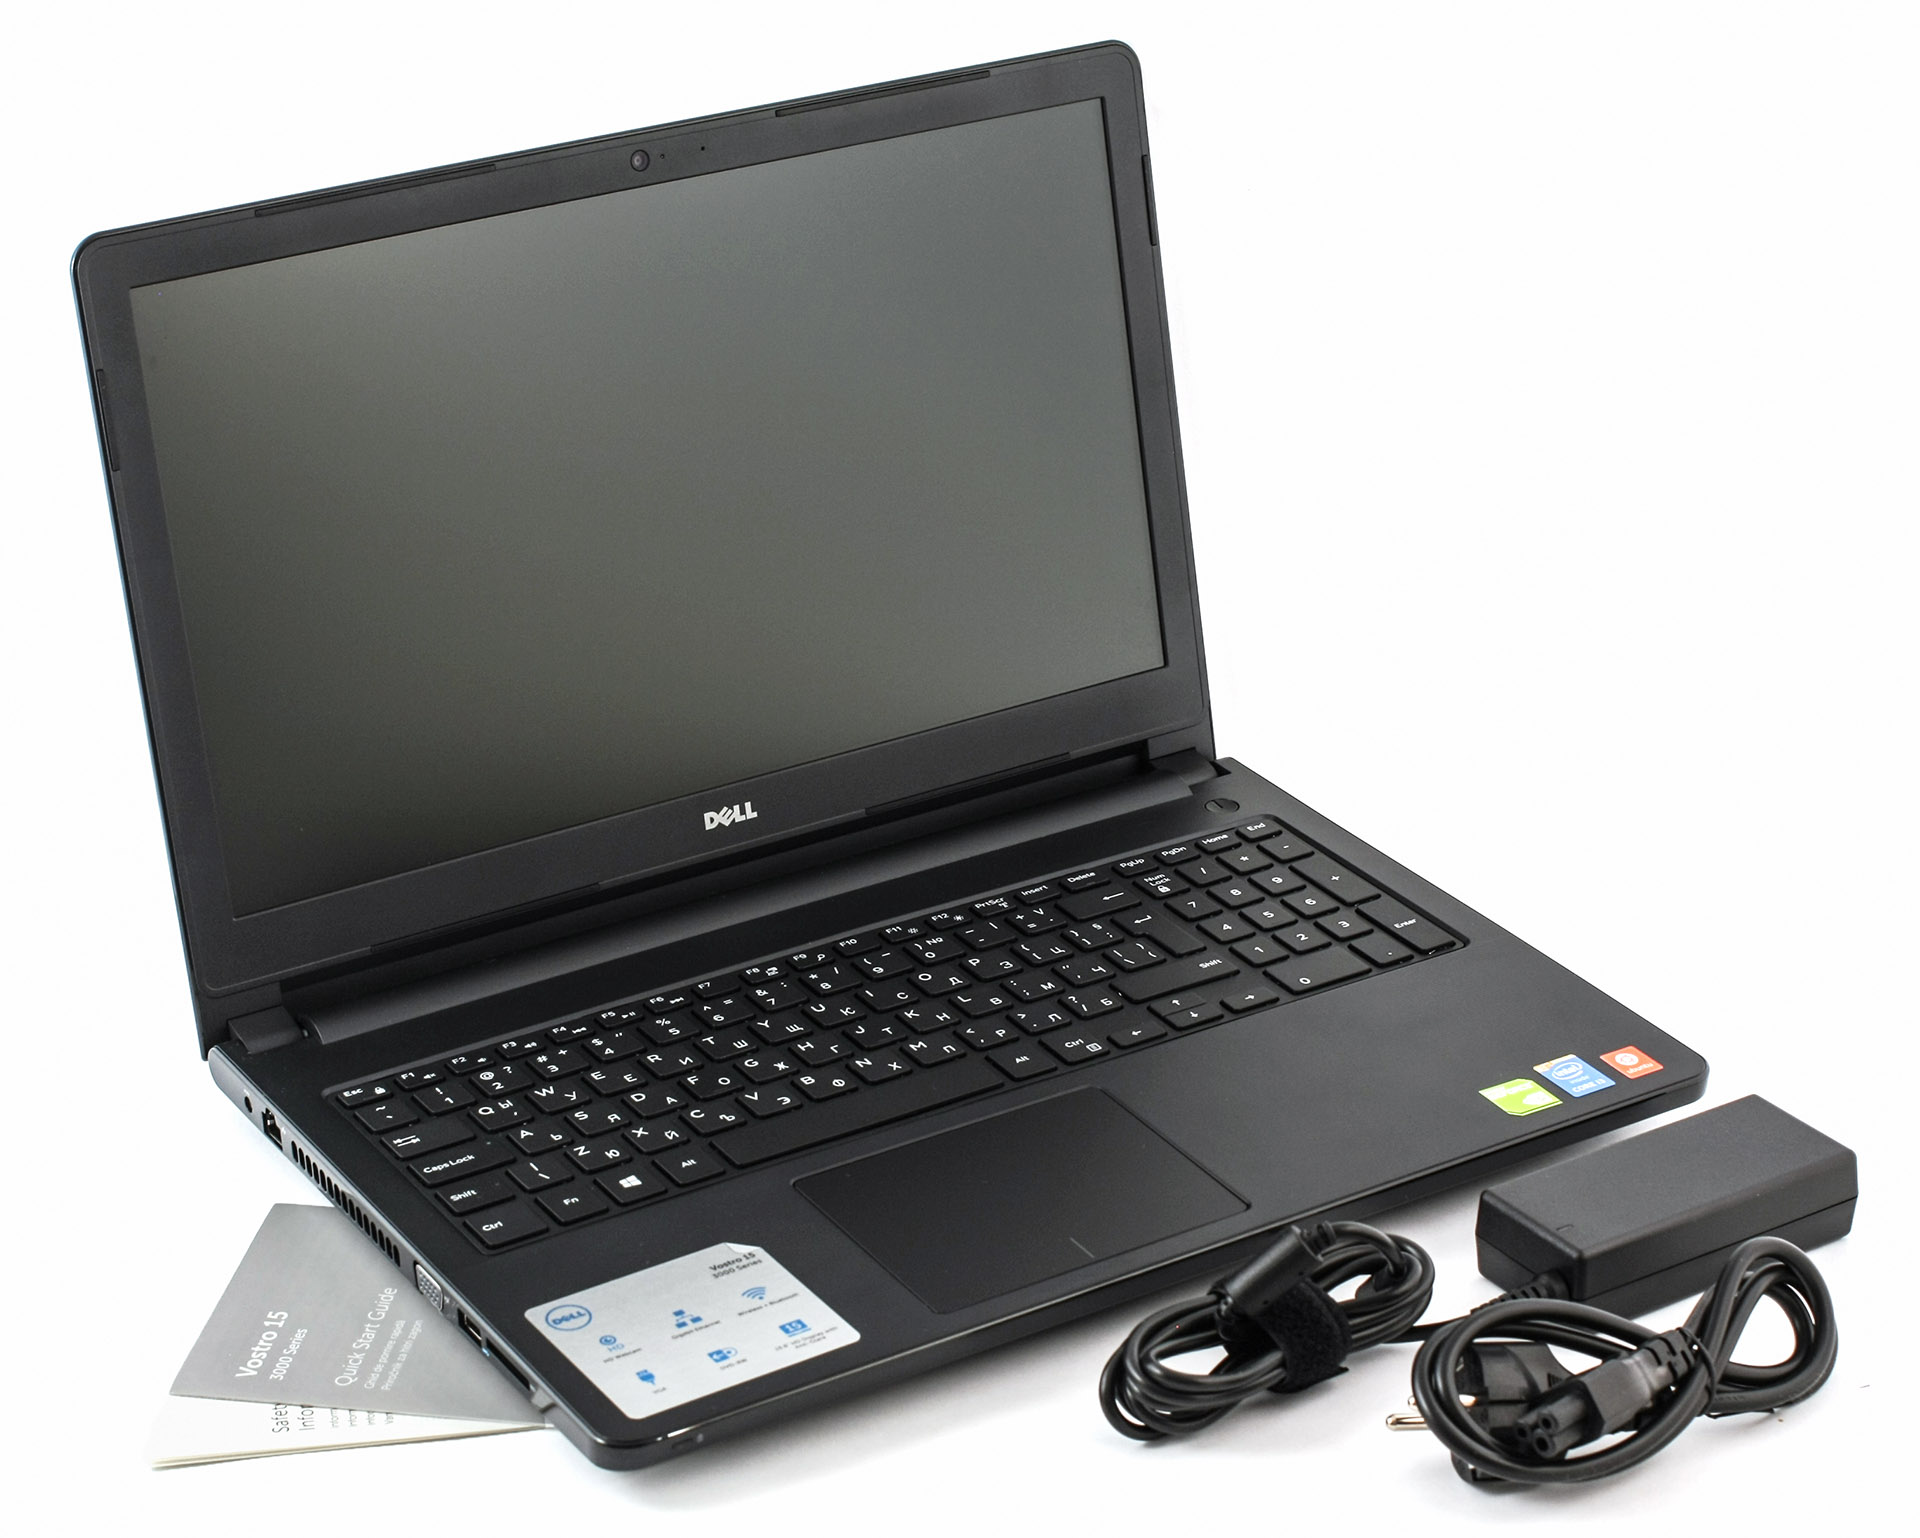 Dell Vostro 3558 (15 3000) - an affordable notebook for the small 